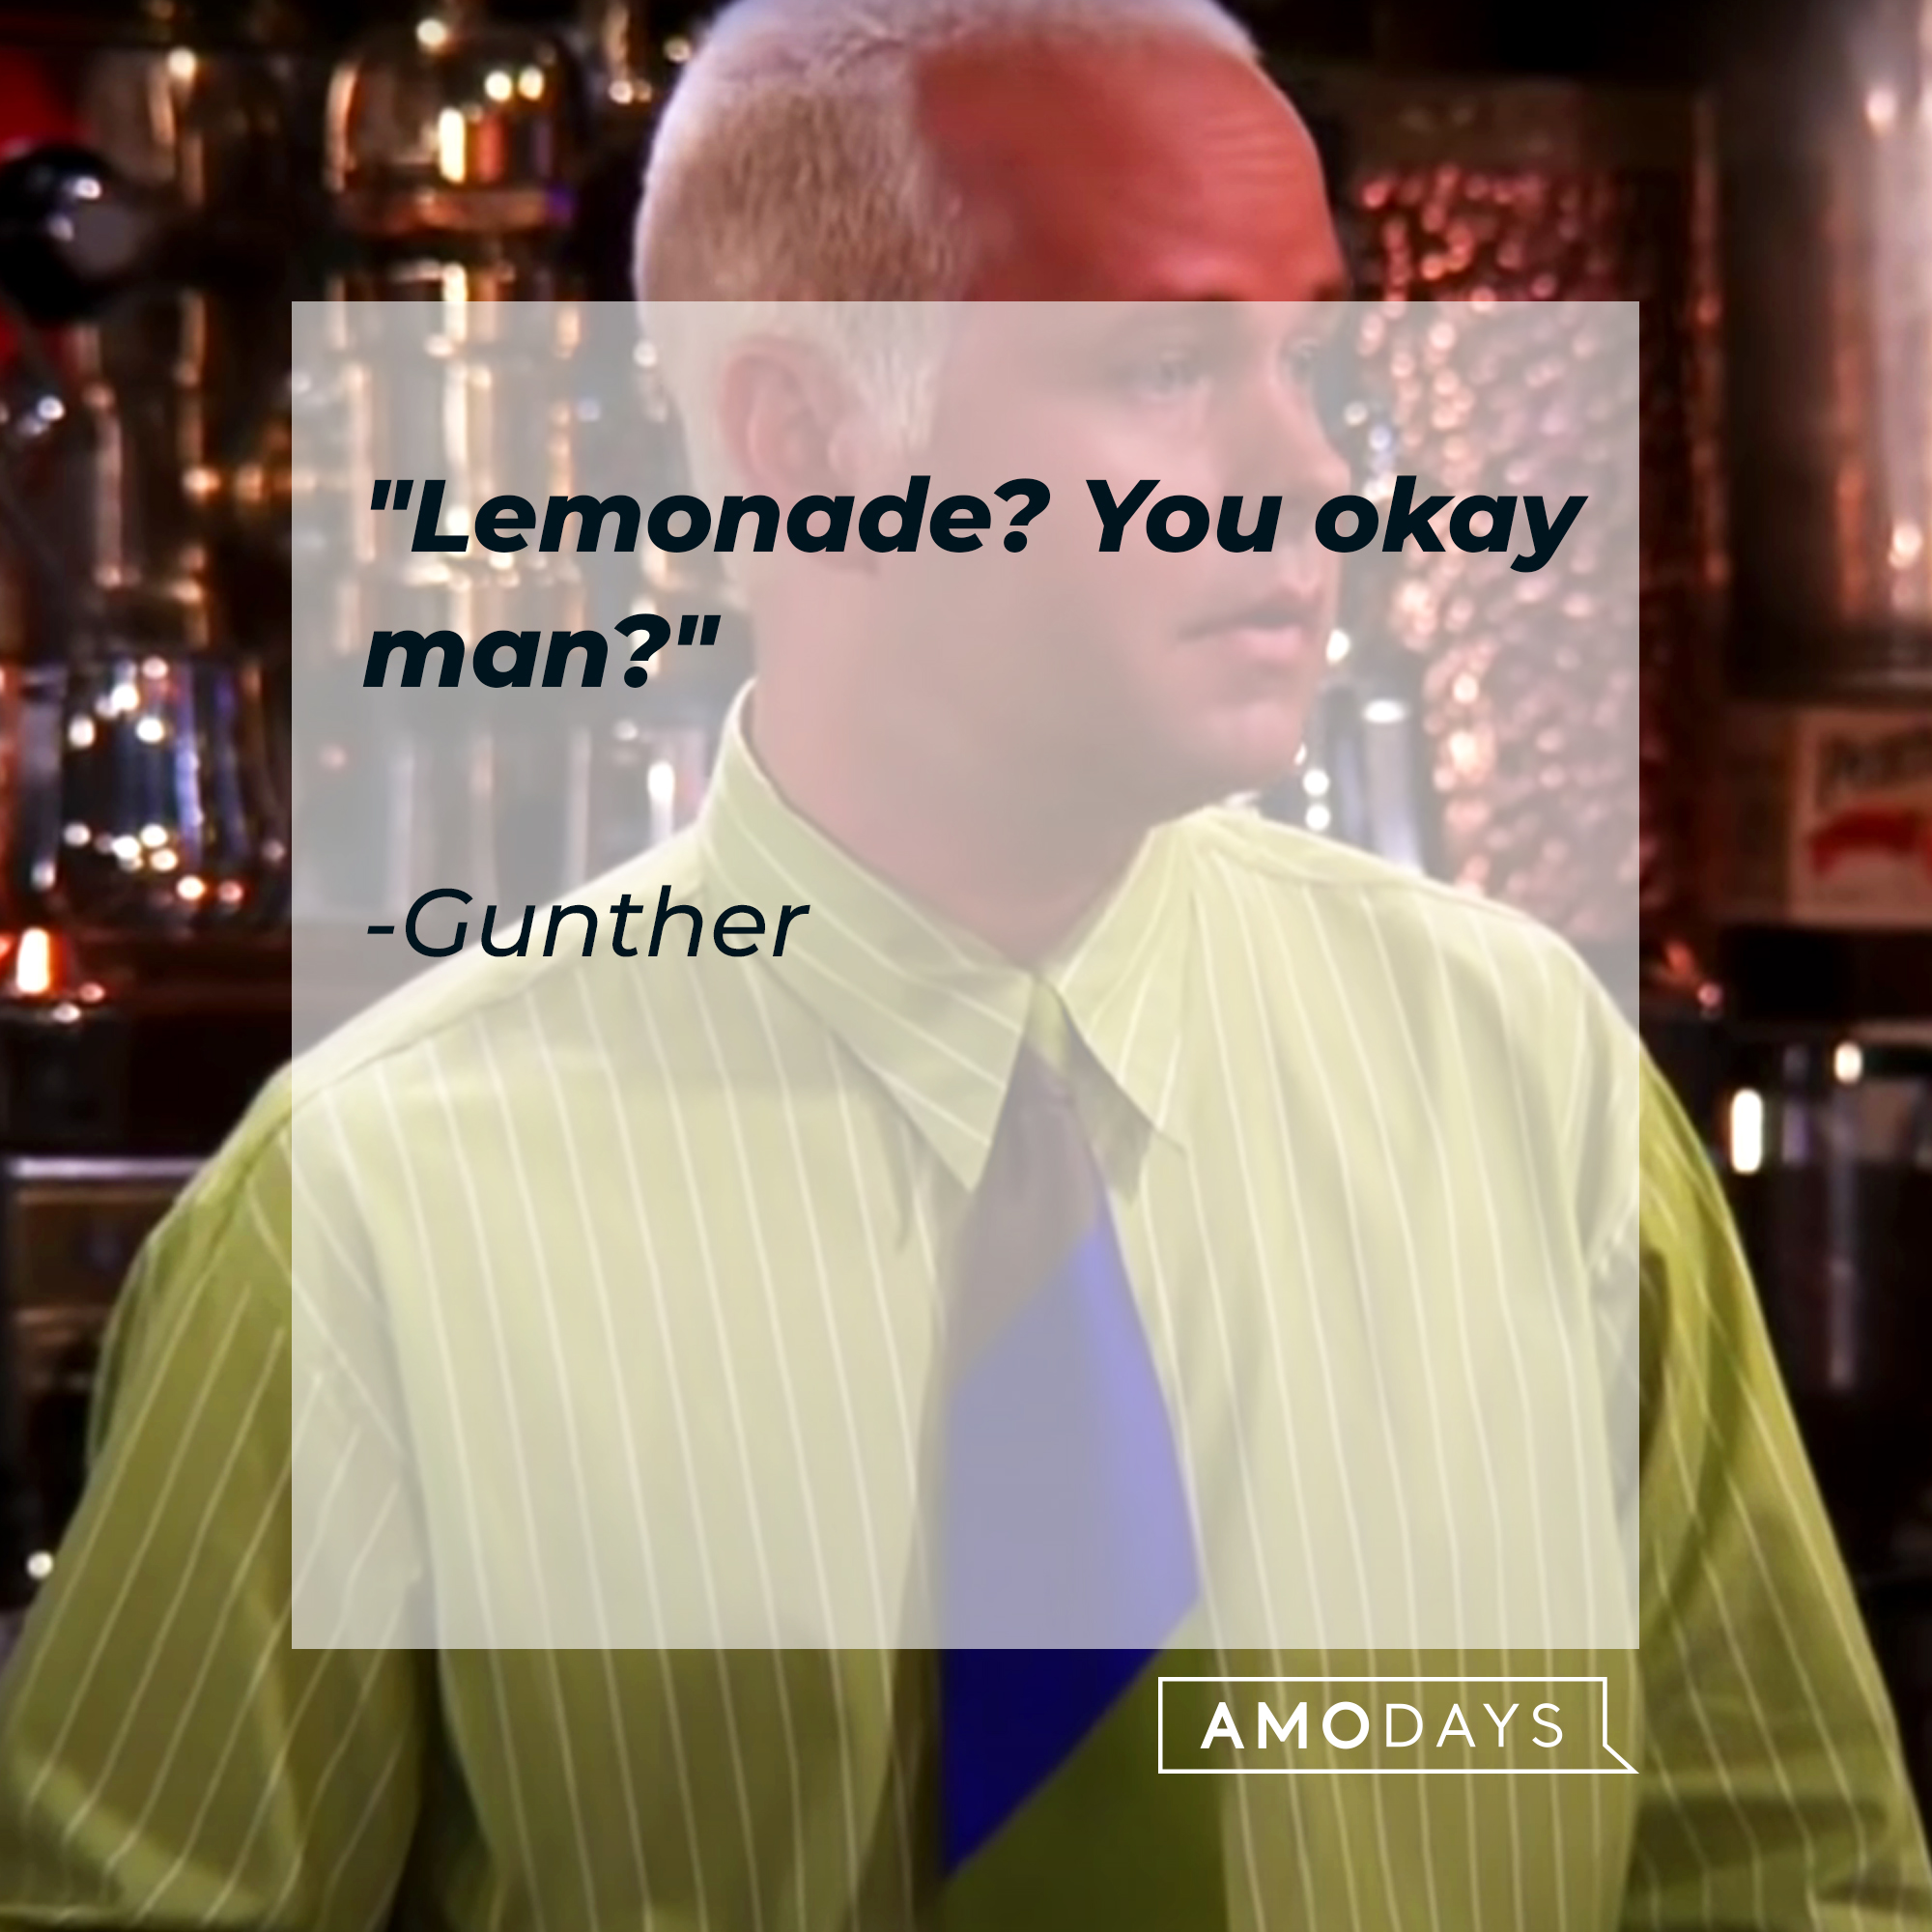 An image of Gunther, with his quote: “Lemonade? You okay man?” | Source: Youtube.com/Friends